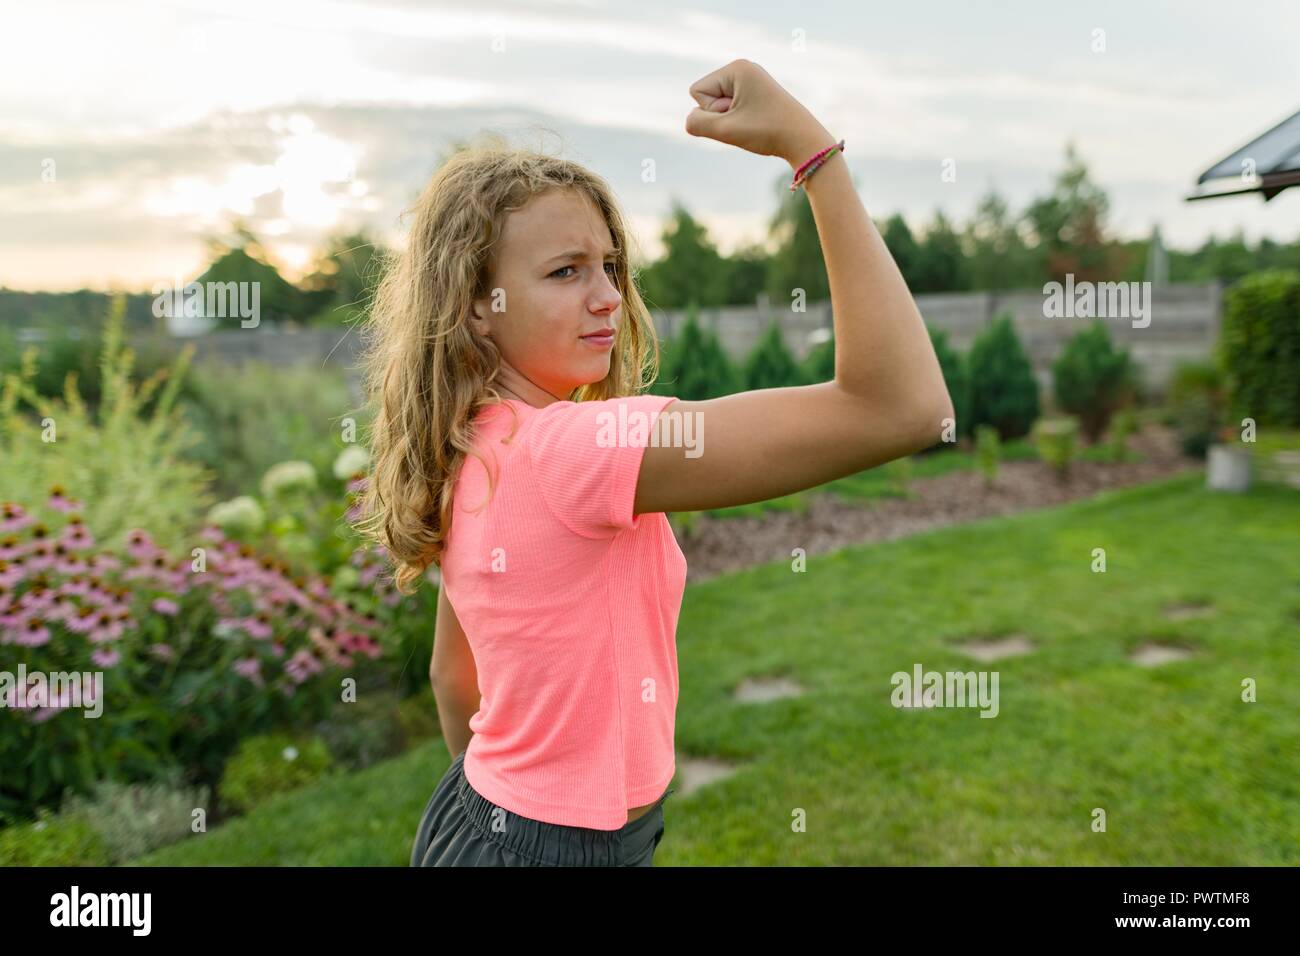 People, power, stamina, strength, health, sport, fitness concept. Outdoor portrait smiling teenage girl flexing her muscles, background green lawn sun Stock Photo